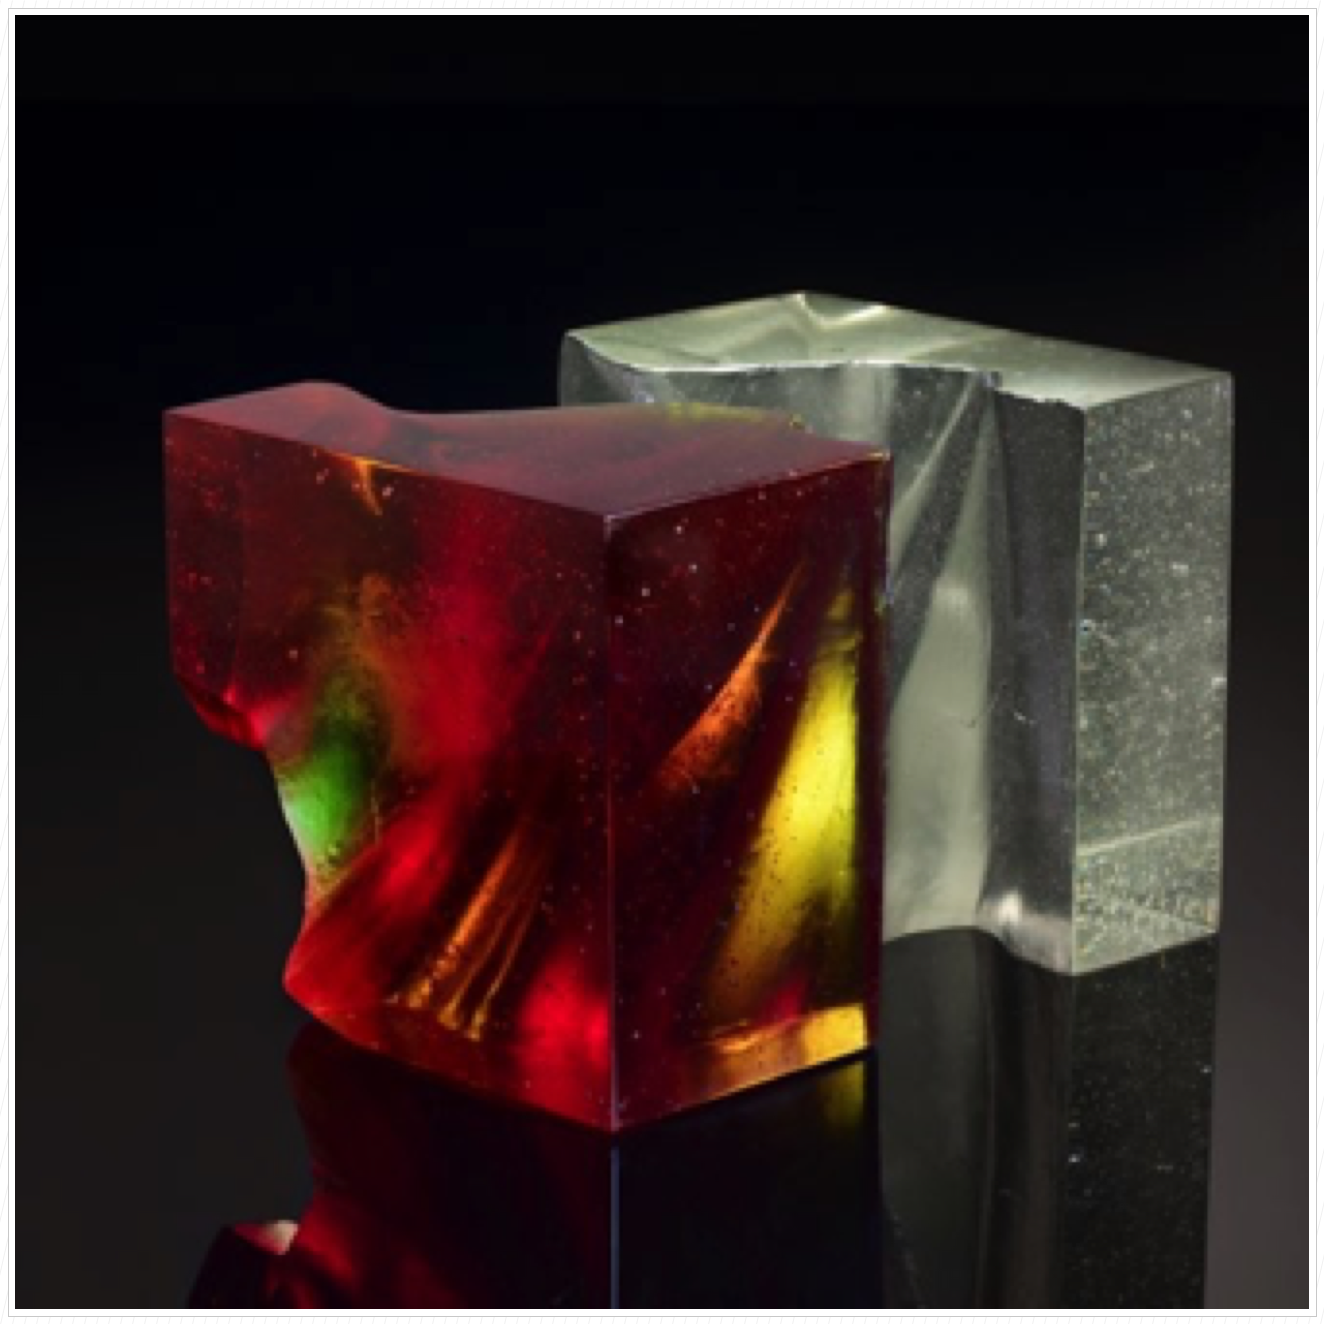 Red Cut Cube - Autumn
2015
Cast Soda Lime Glass (2 pieces)
10 x 14 x 10 in.
$18,000